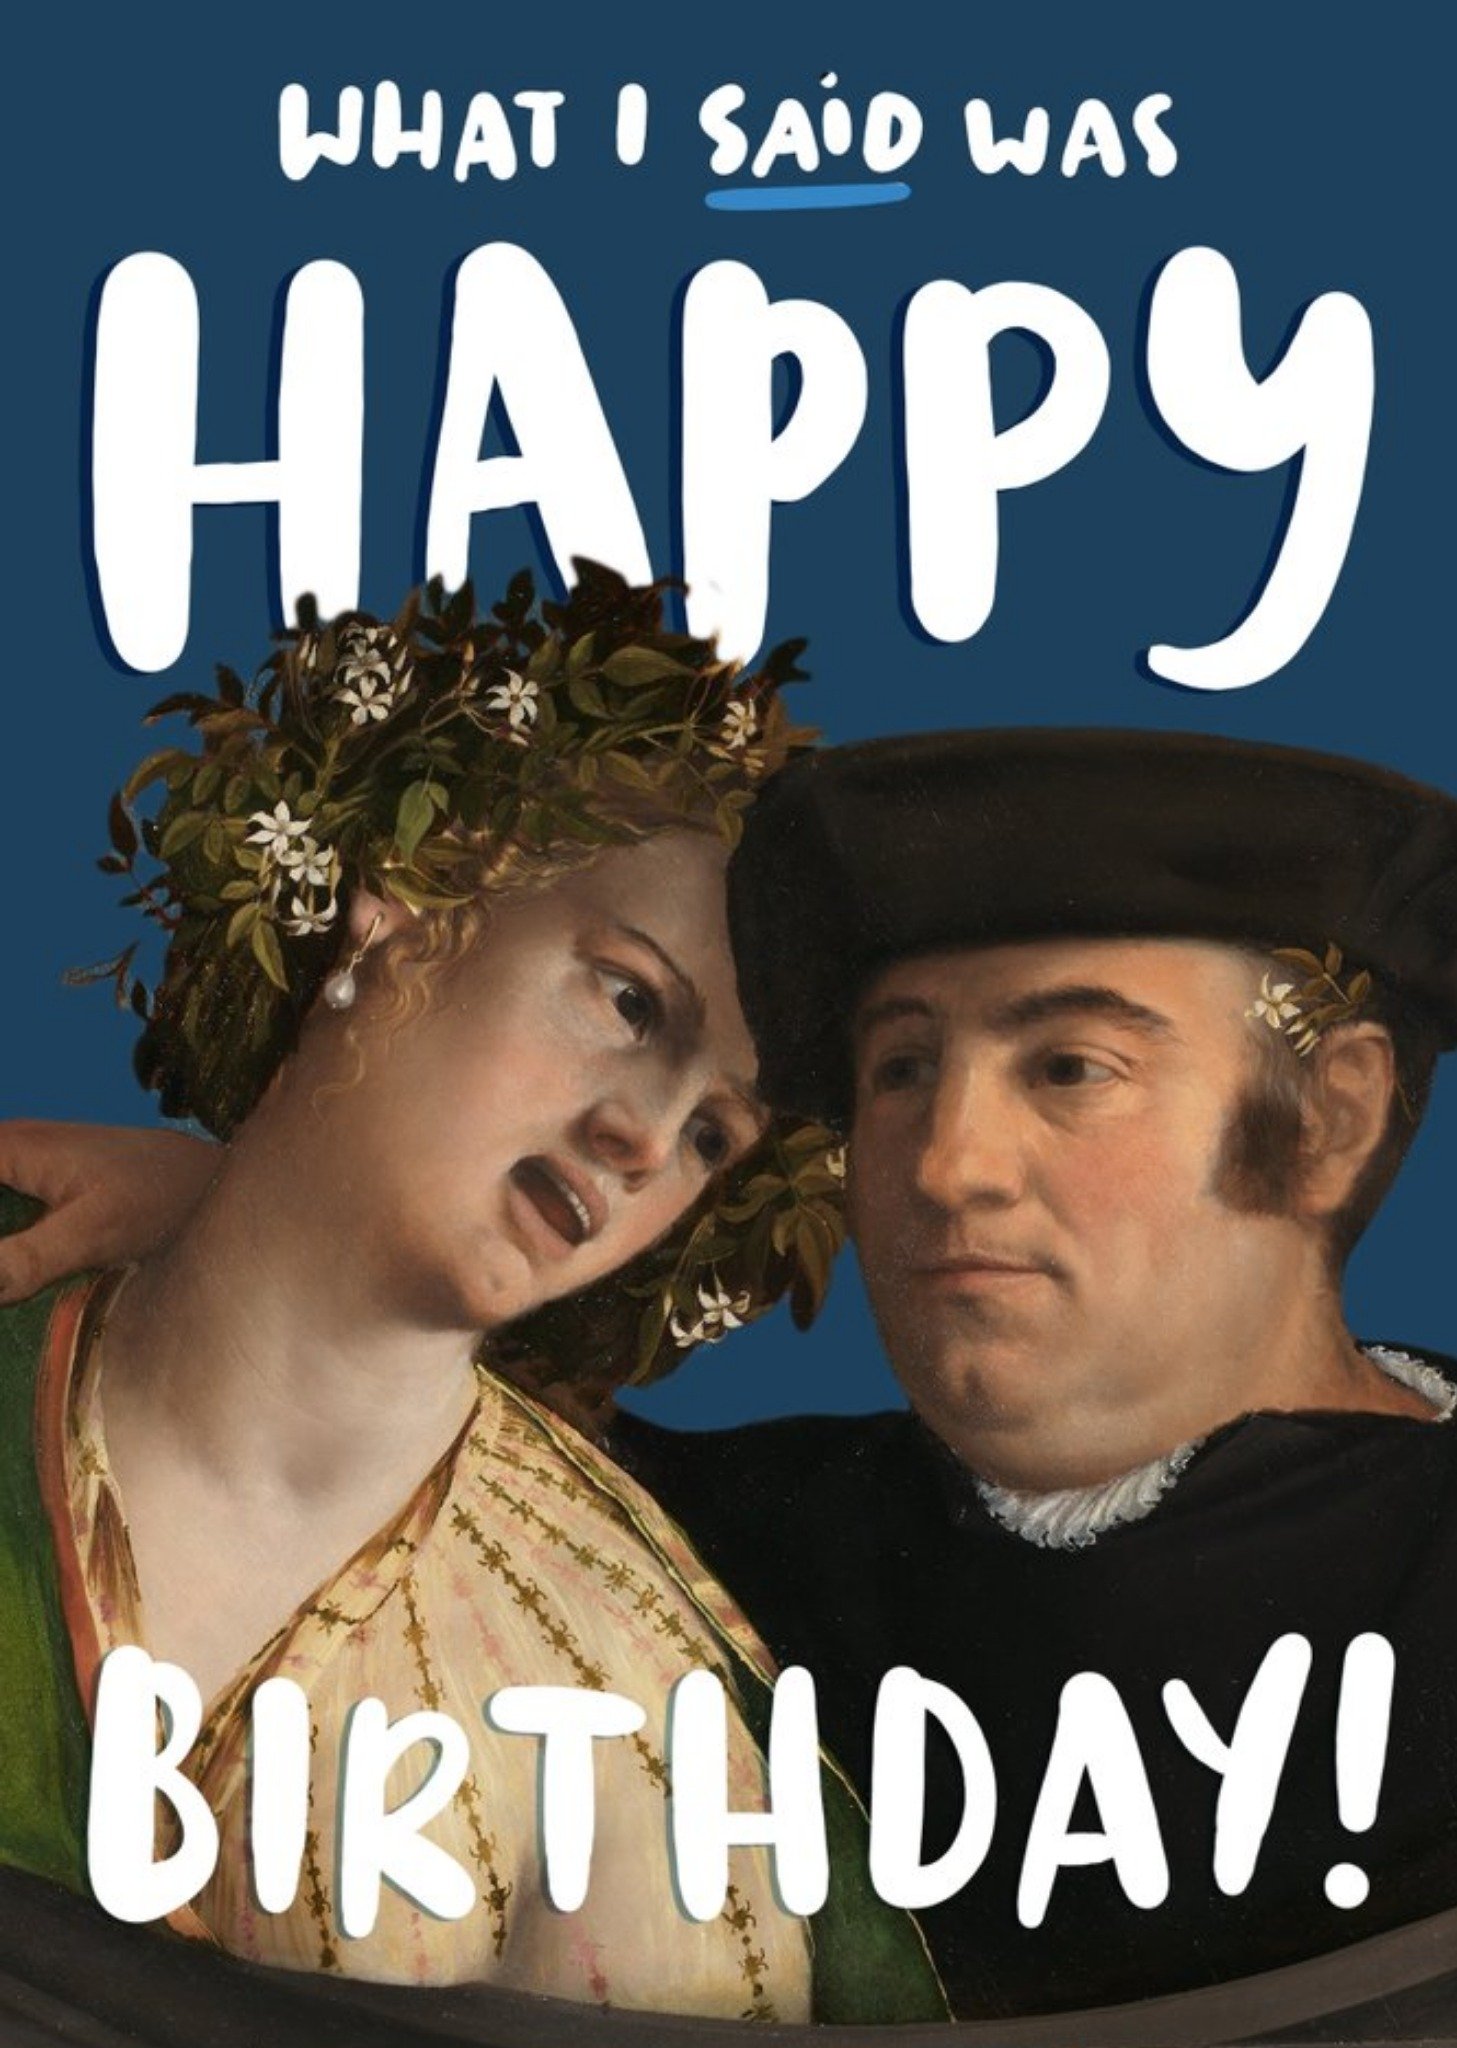 The National Gallery Funny What I Said Was Happy Birthday Card, Large